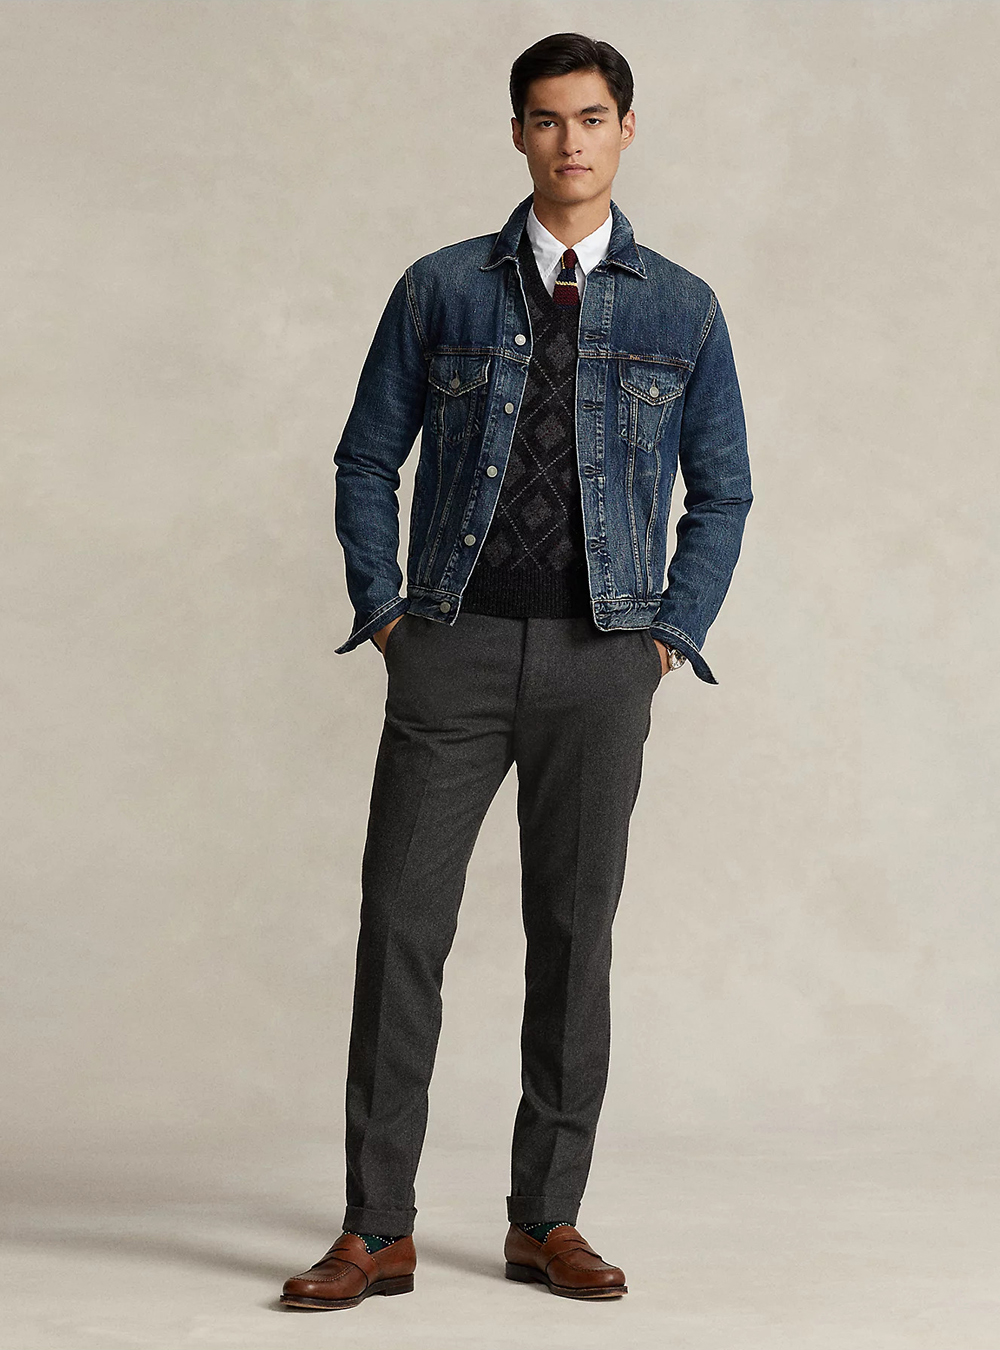 denim jacket, charcoal jumper, white shirt, and brown loafers